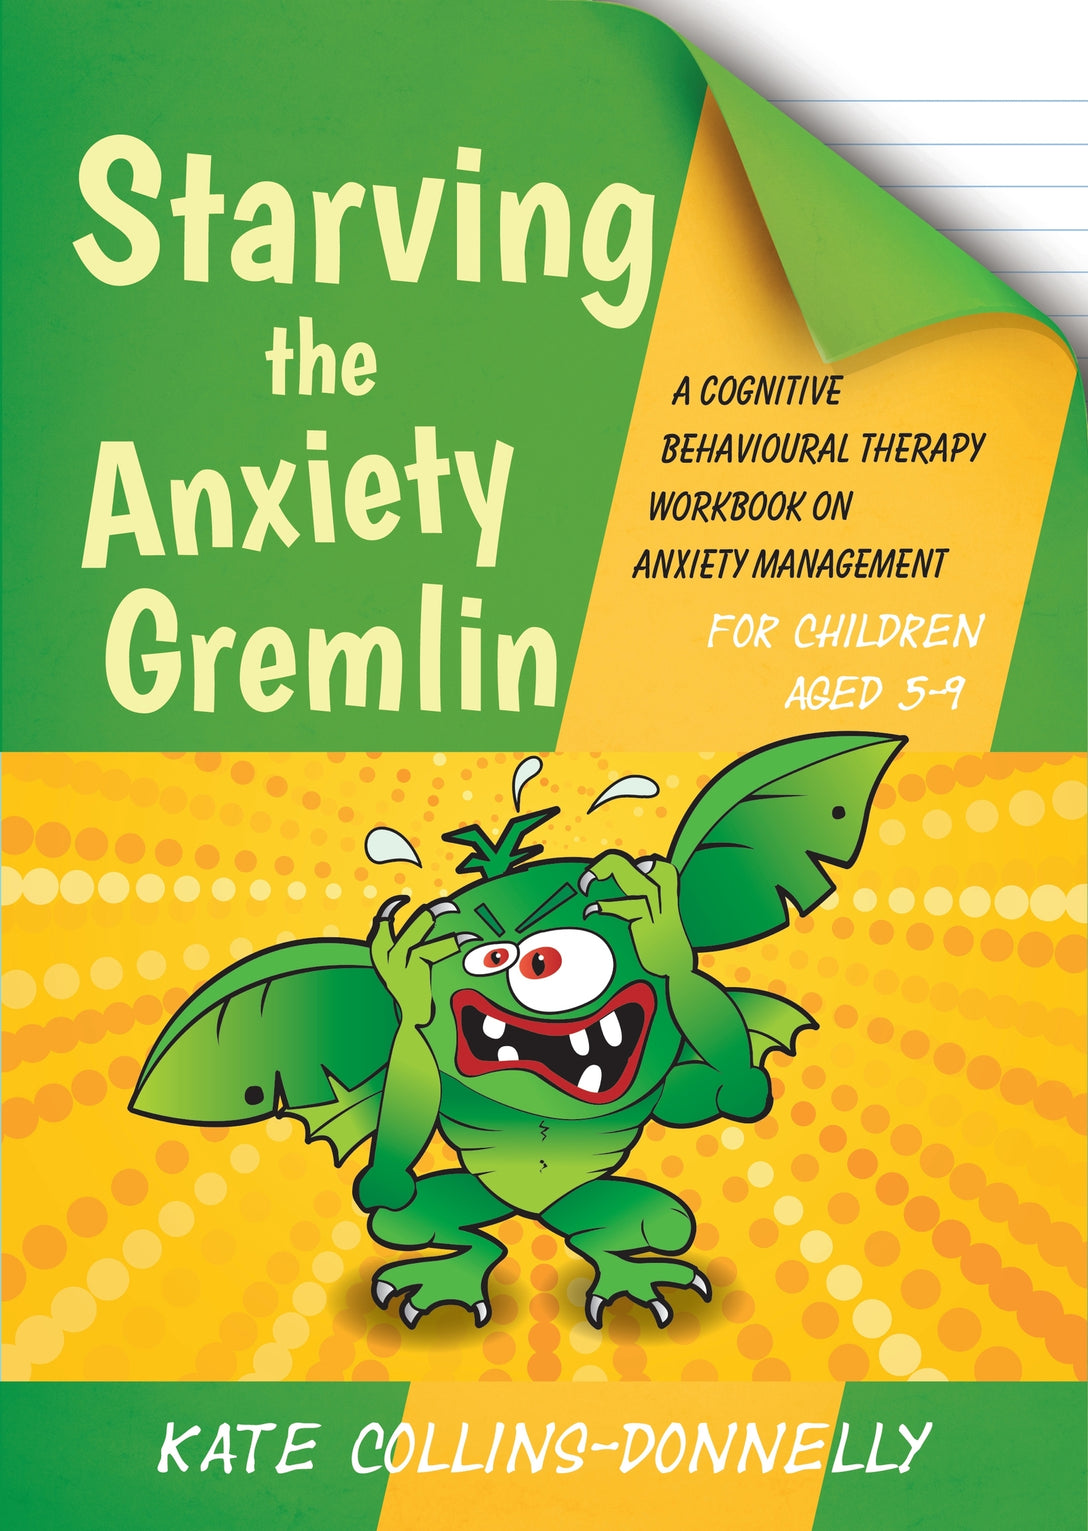 Starving the Anxiety Gremlin for Children Aged 5-9 by Kate Collins-Donnelly